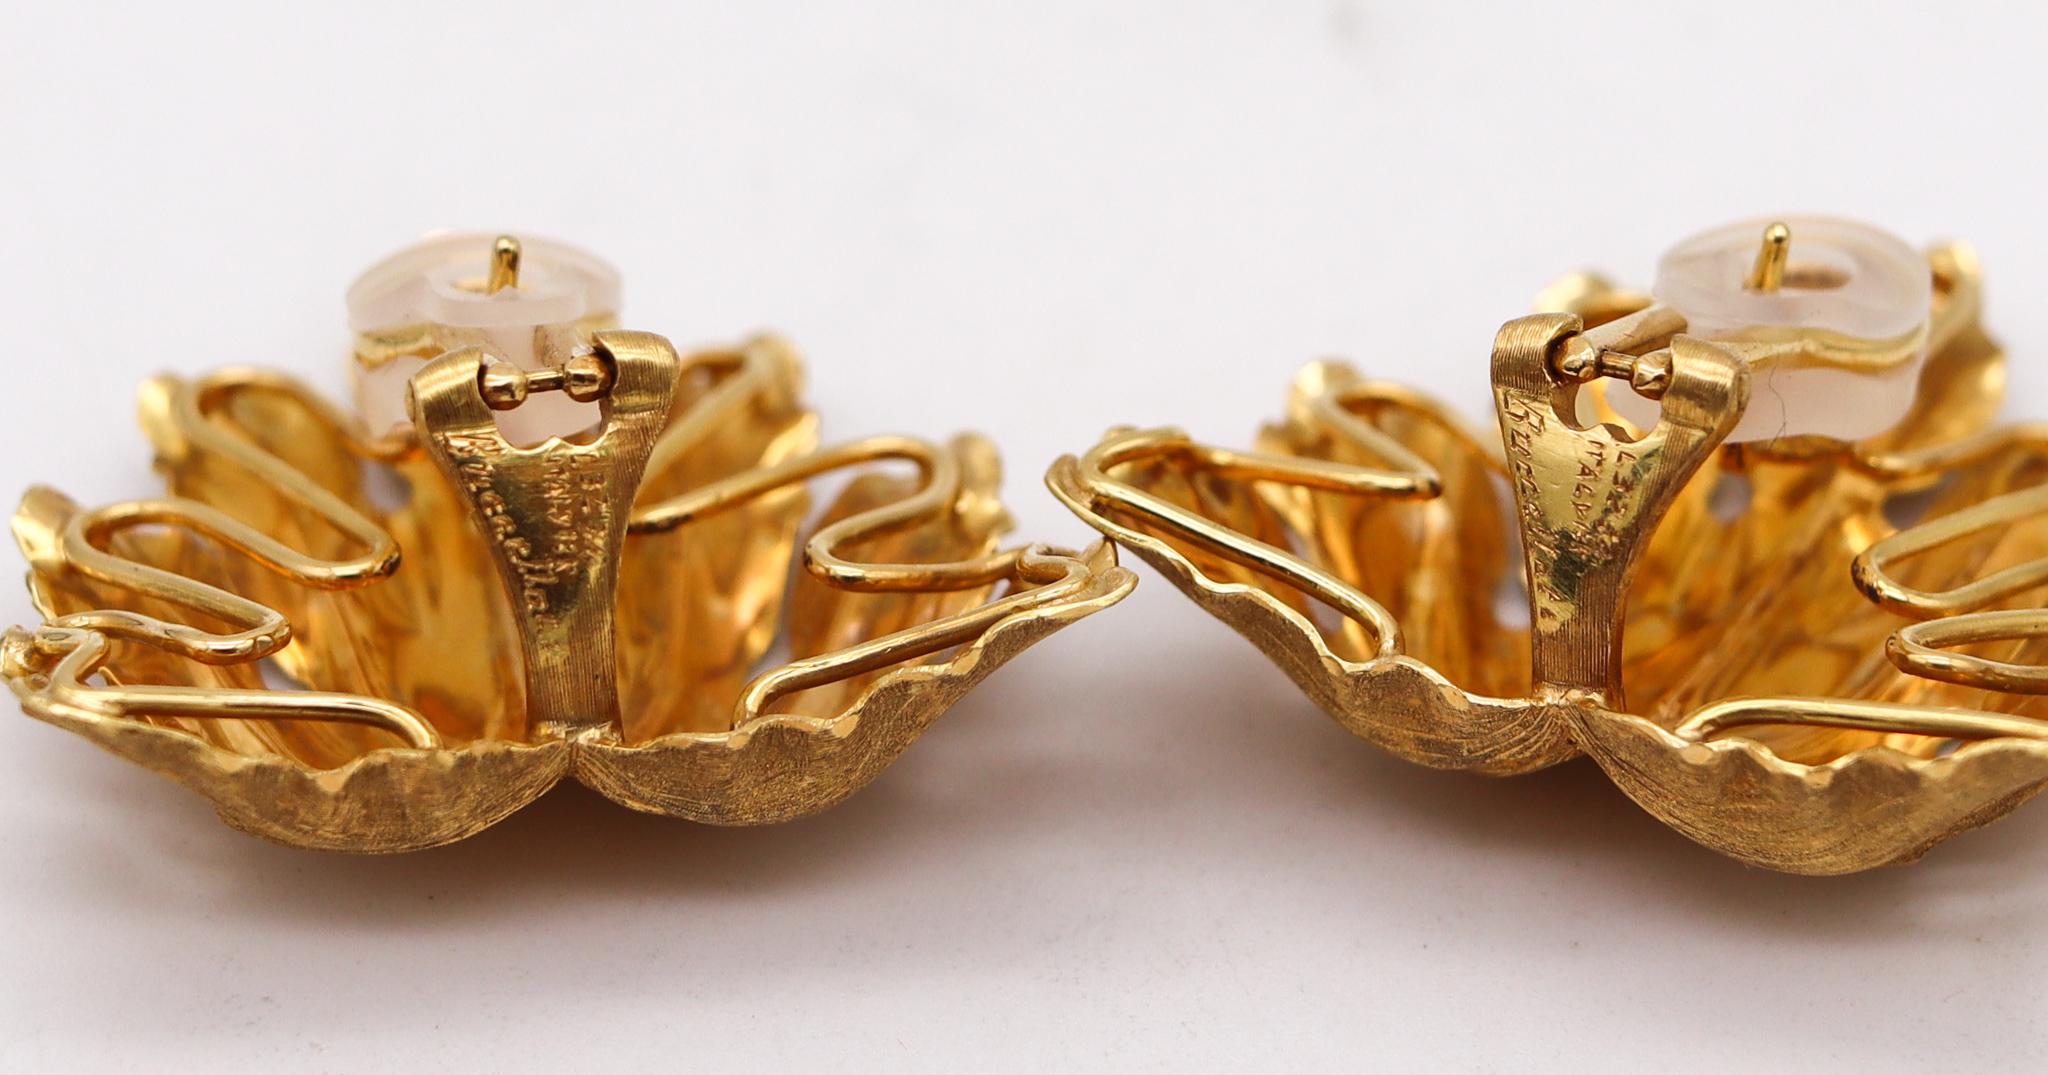 Mario Buccellati 1970 Oversized Leafs Clips Earrings Textured 18kt Yellow Gold In Excellent Condition For Sale In Miami, FL